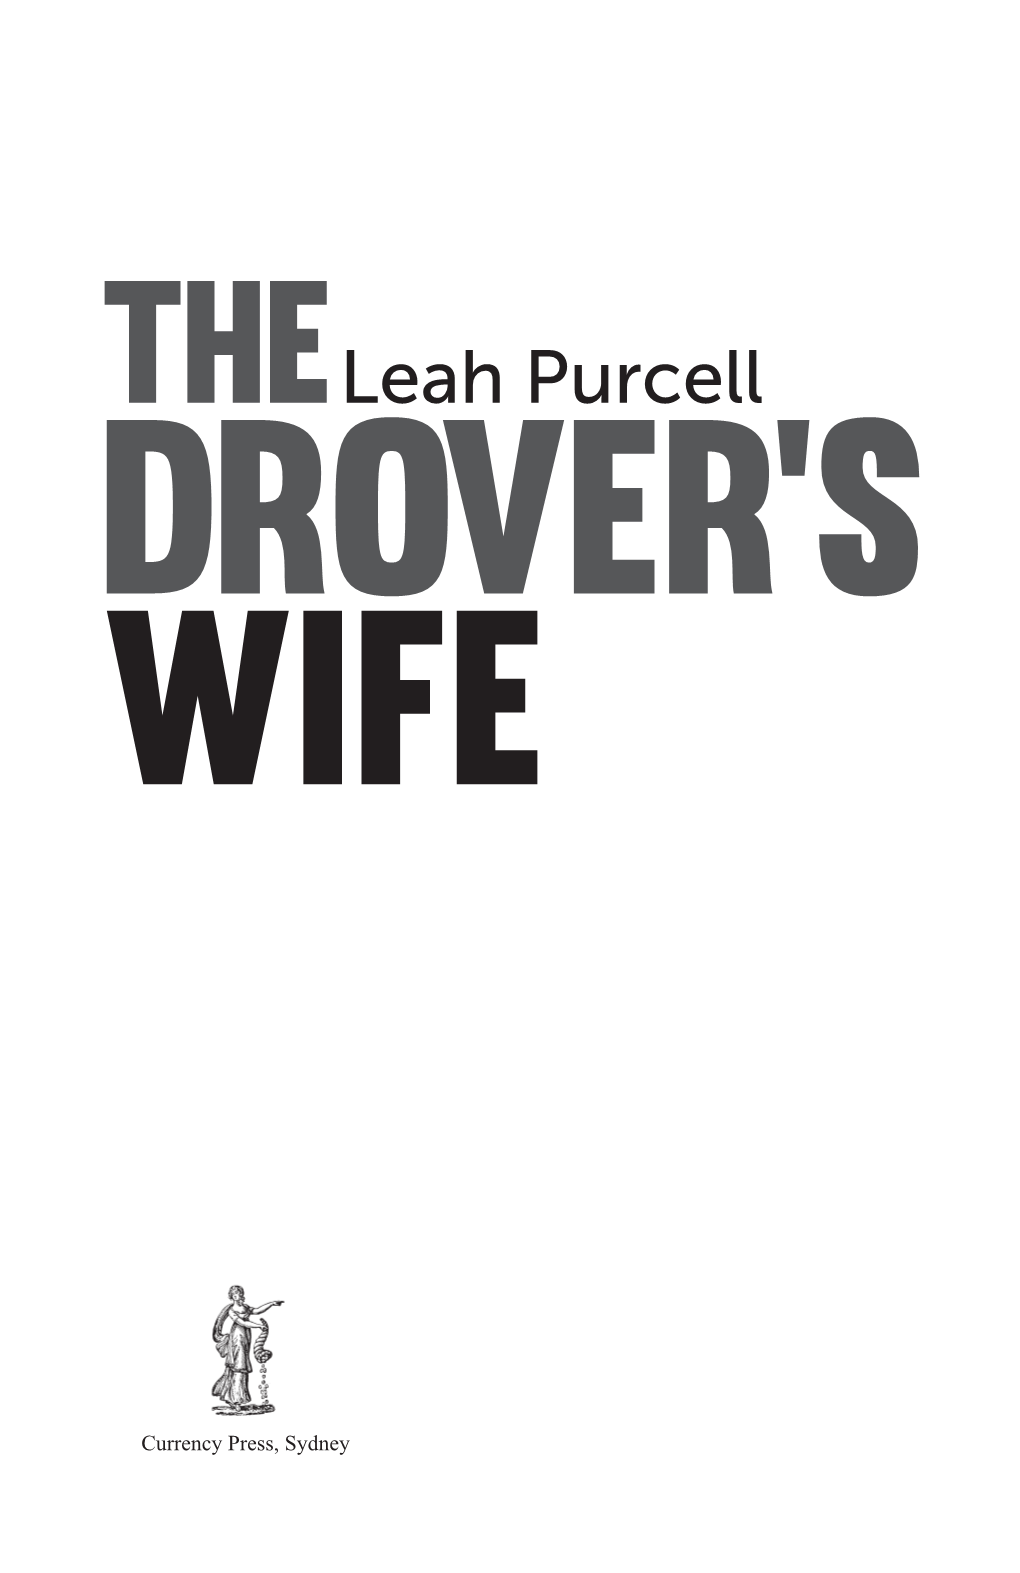 Leah Purcell DROVER’S WIFE